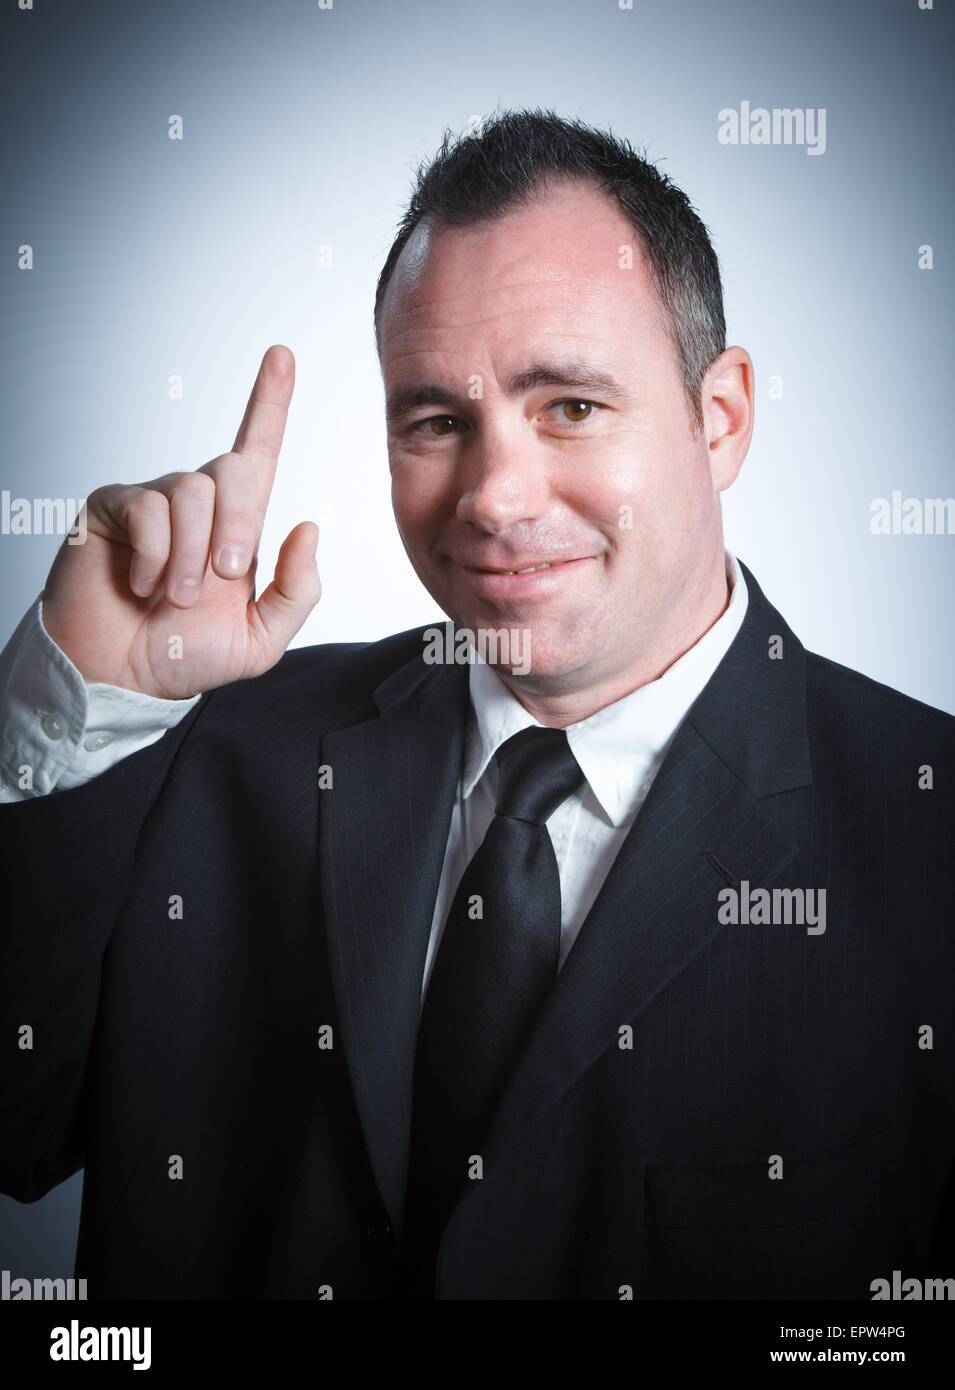 Caucasian businessman 40 years old isolated on a grey background Stock Photo